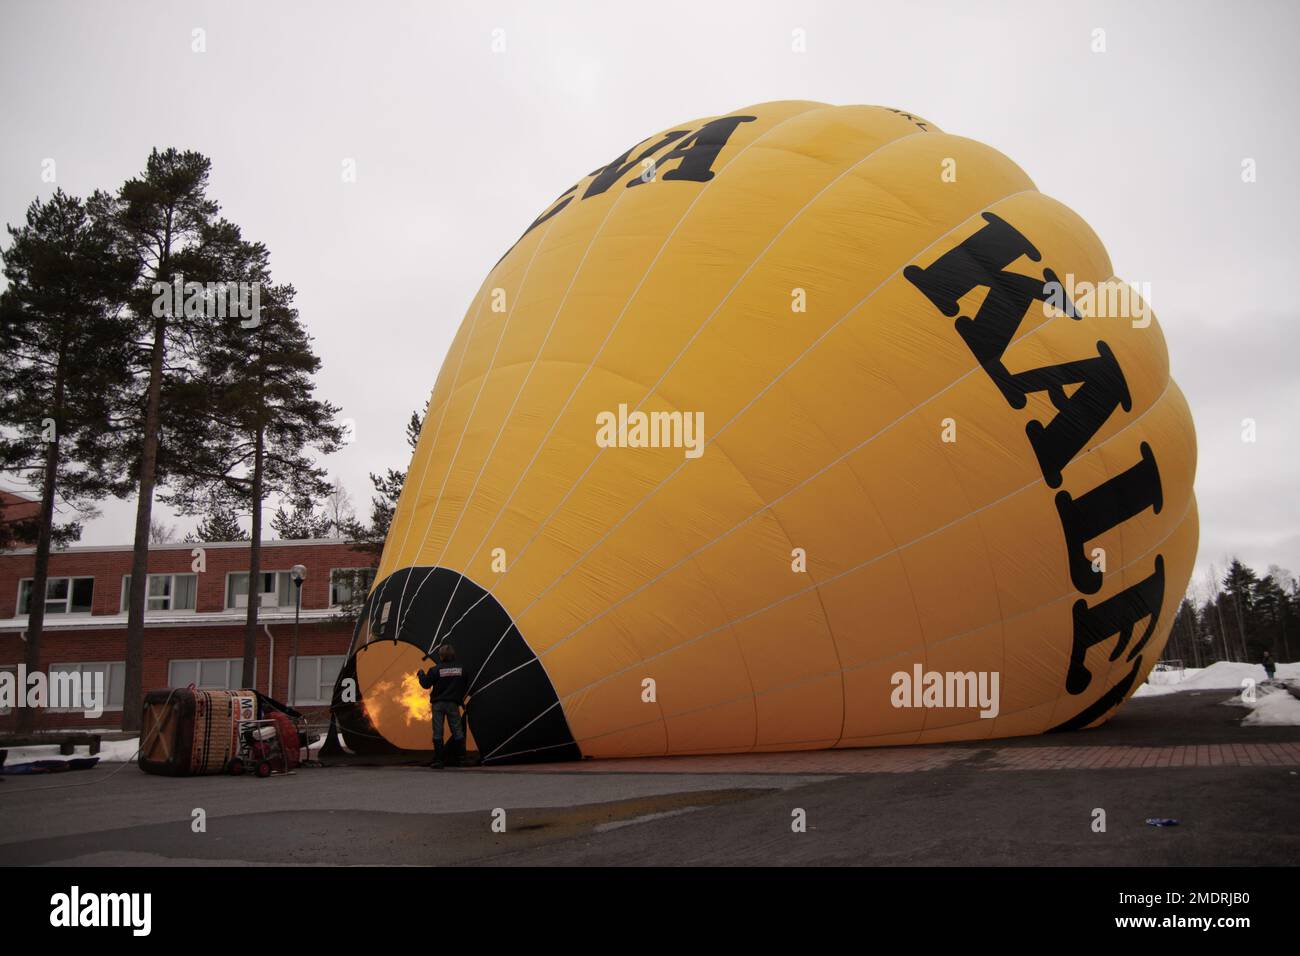 A hot air balloon flight in Finland. Photoshoot taken when the balloon was on the ground for fill up and during lift off and flight. Cold winter day Stock Photo